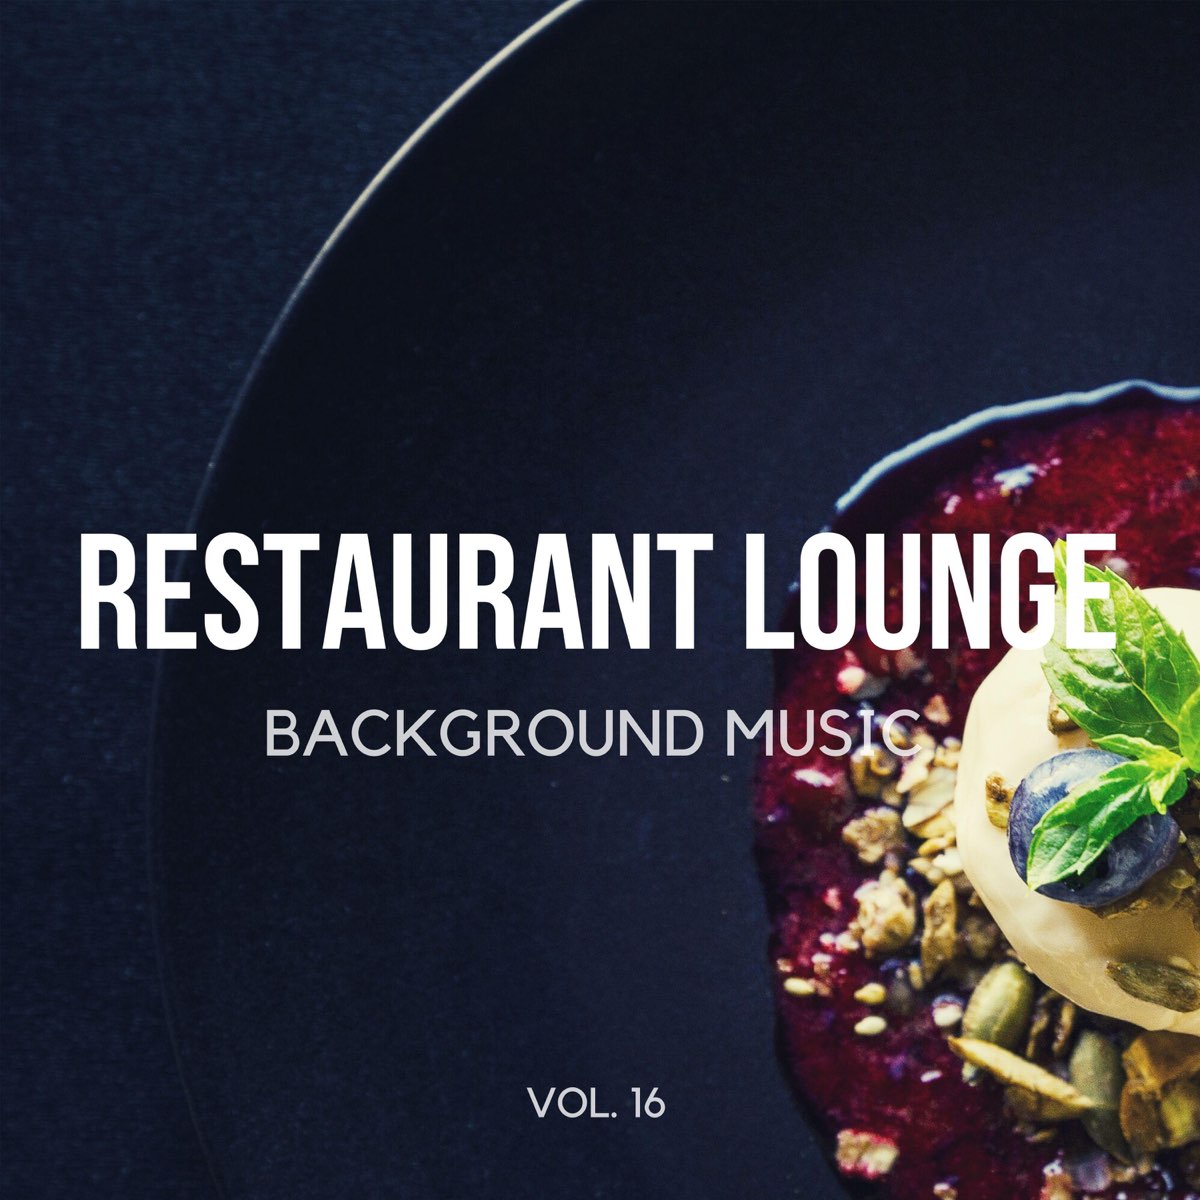 Restaurant Lounge Background Music, Vol. 16 by Restaurant Lounge Background  Music on Apple Music